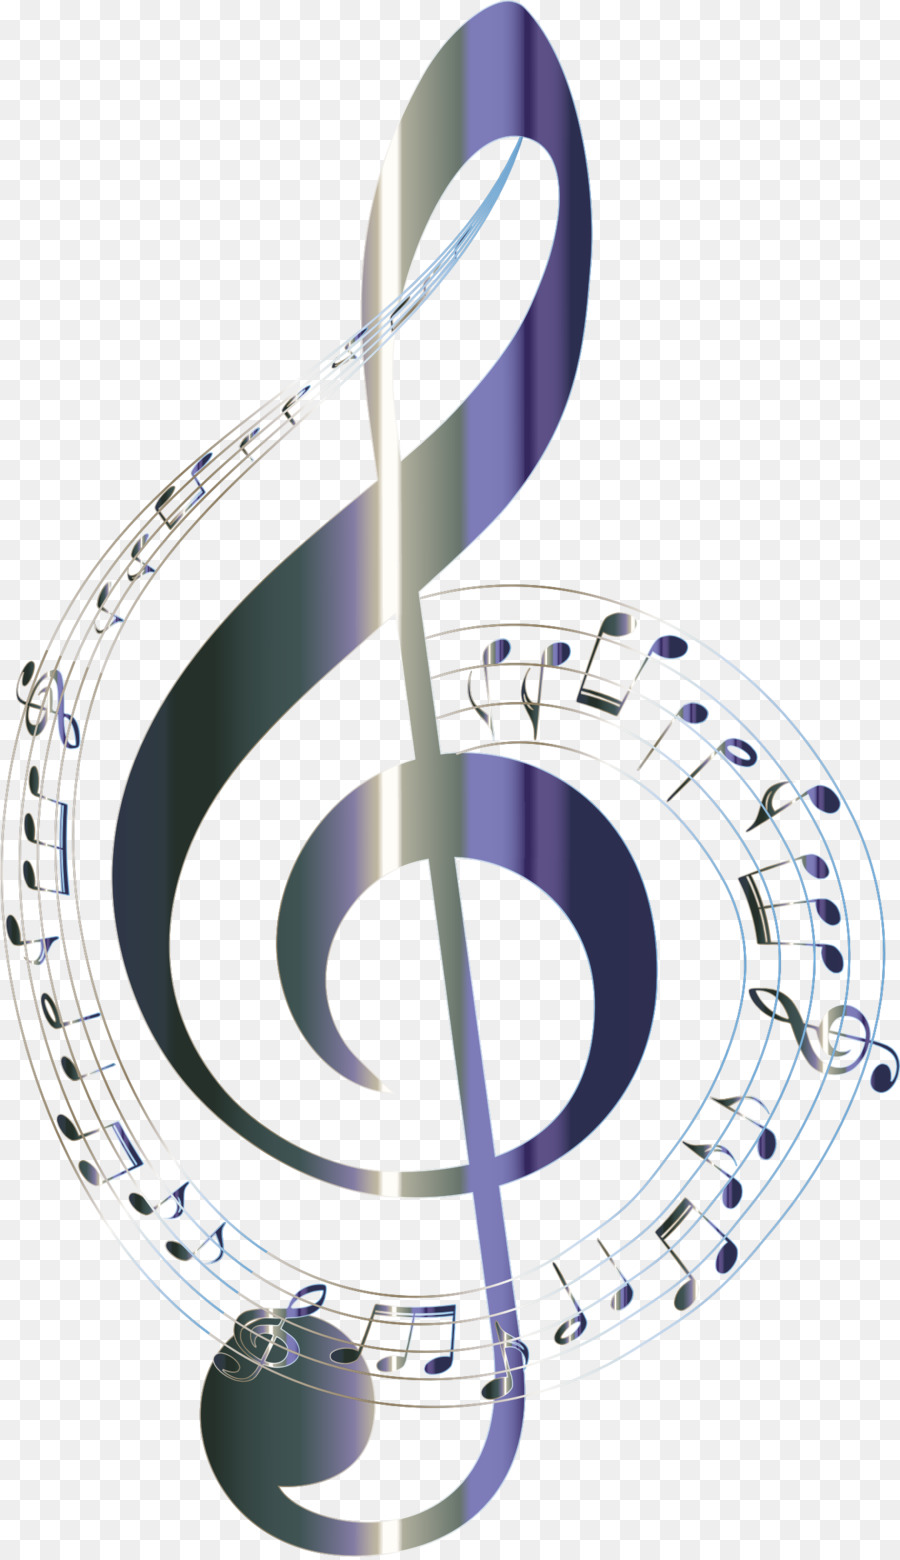 Portable Network Graphics Musical note Image Clef - musical notes png